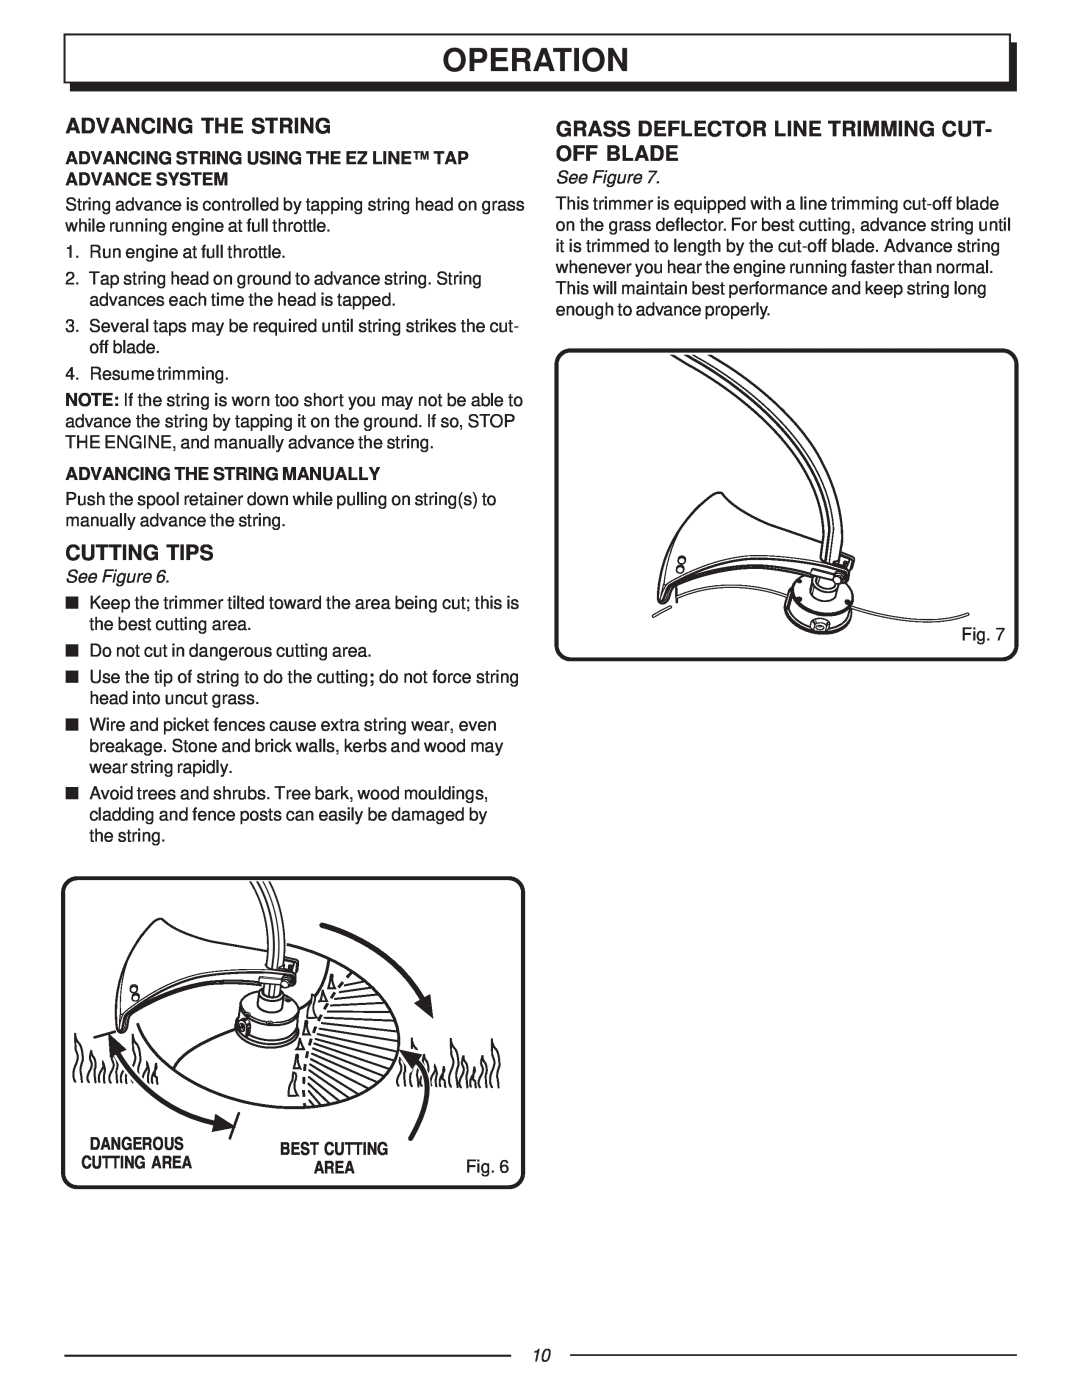 Homelite UT70121A Advancing The String, Cutting Tips, Grass Deflector Line Trimming Cut- Off Blade, Operation, See Figure 